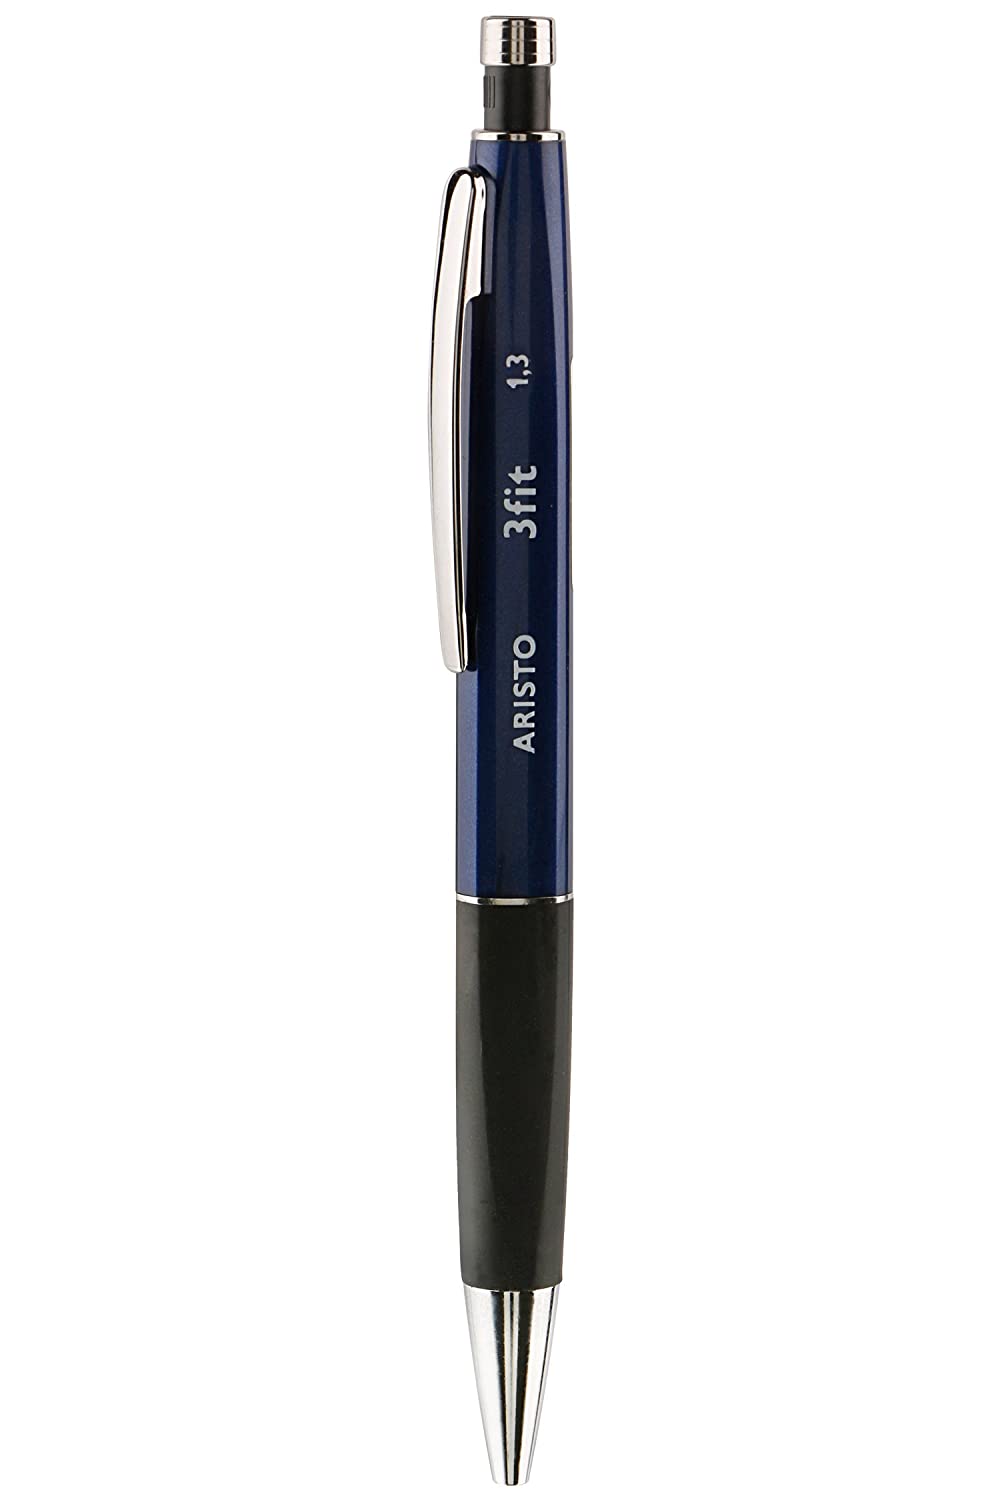 Aristo 3FIT 1.3mm Fully Retractable Mechanical Pencil